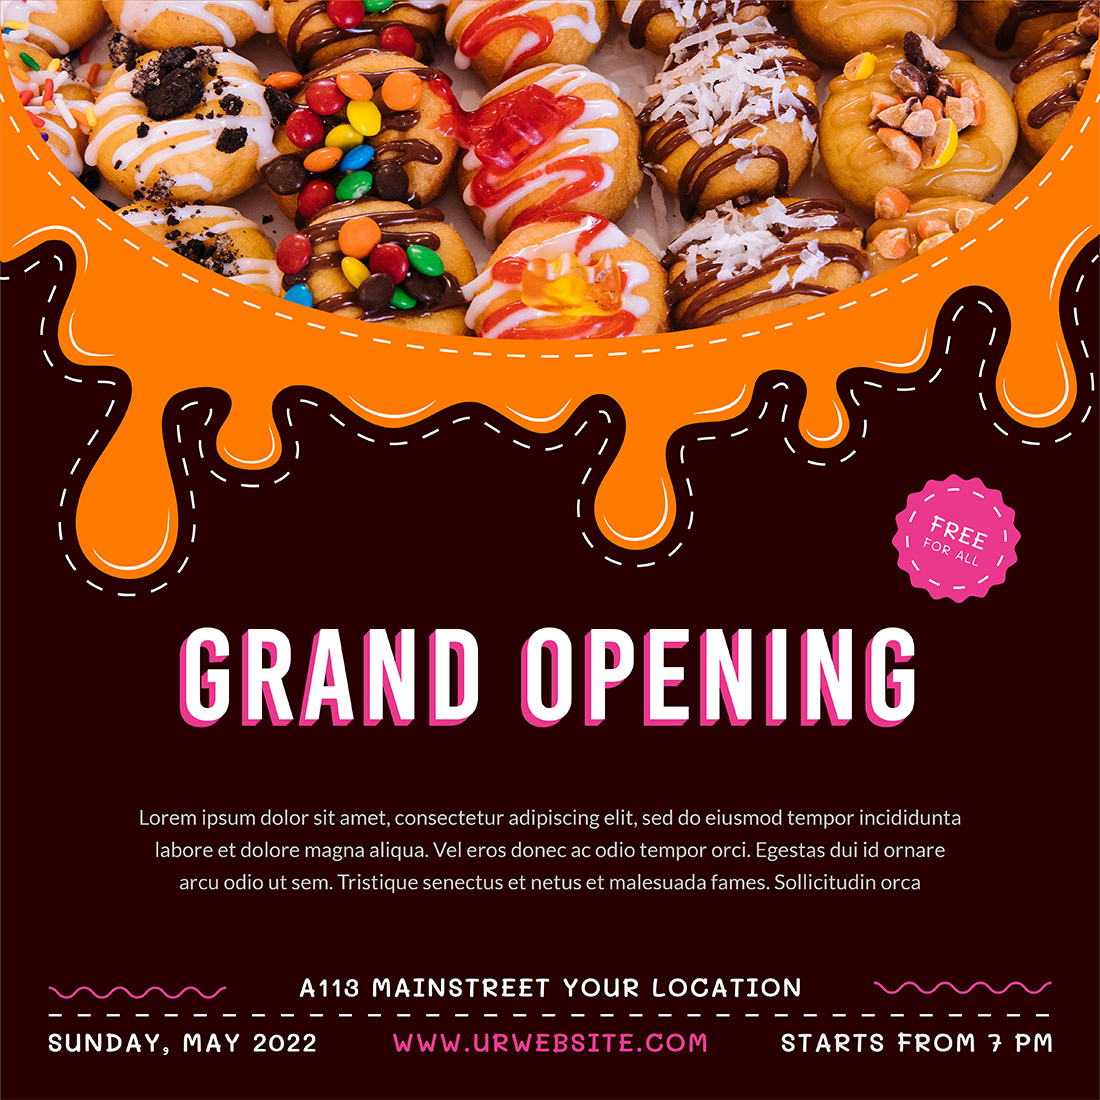 Delicious Donuts Social Media Post Templates grand opening.